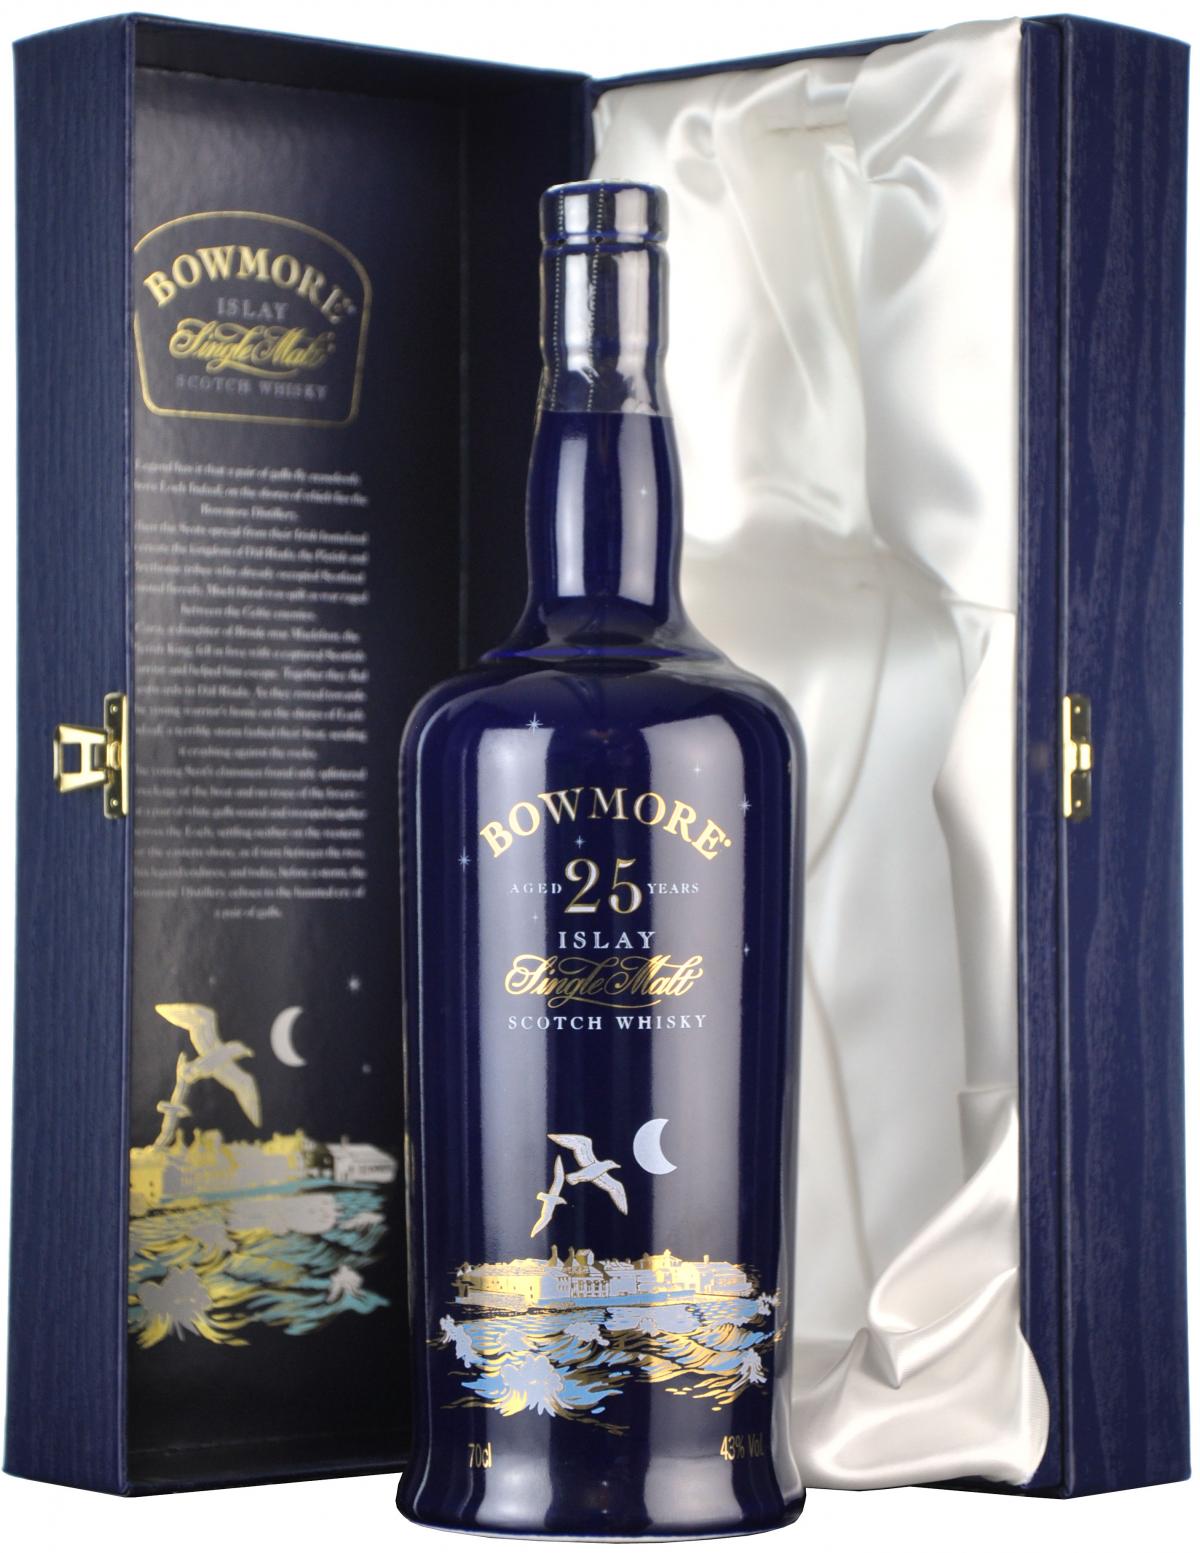 Bowmore 25 Year Old | SeaGulls